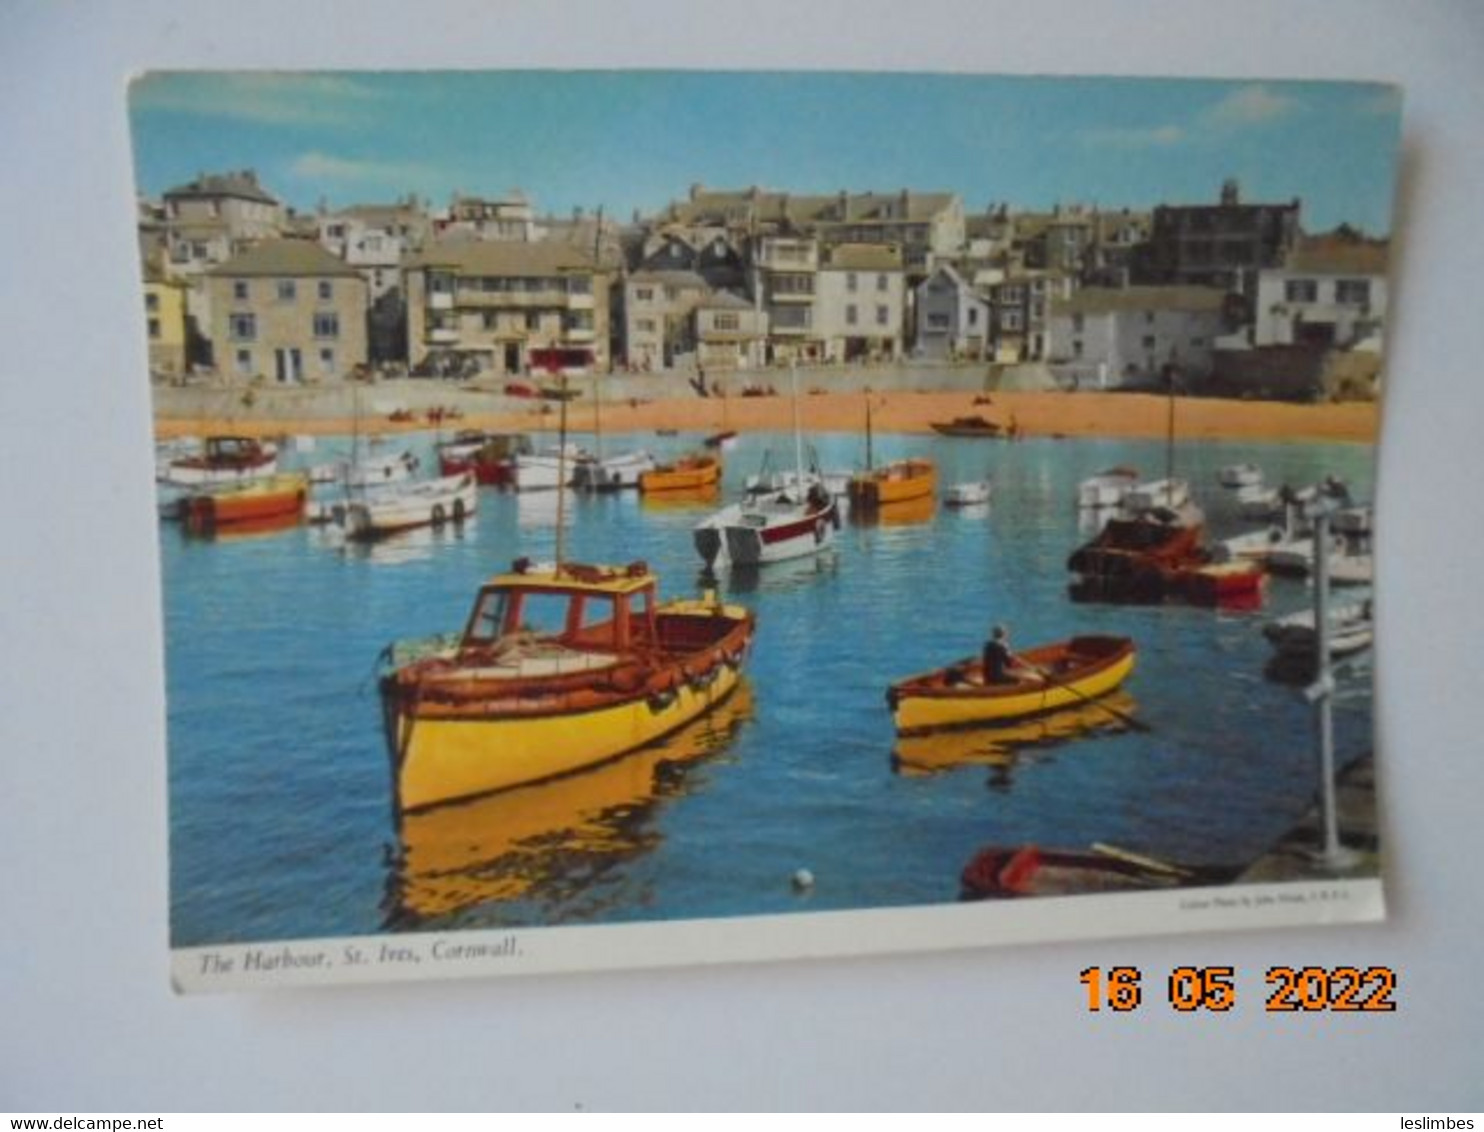 The Harbour, St. Ives, Cornwall. Hinde 2DC 124 - St.Ives